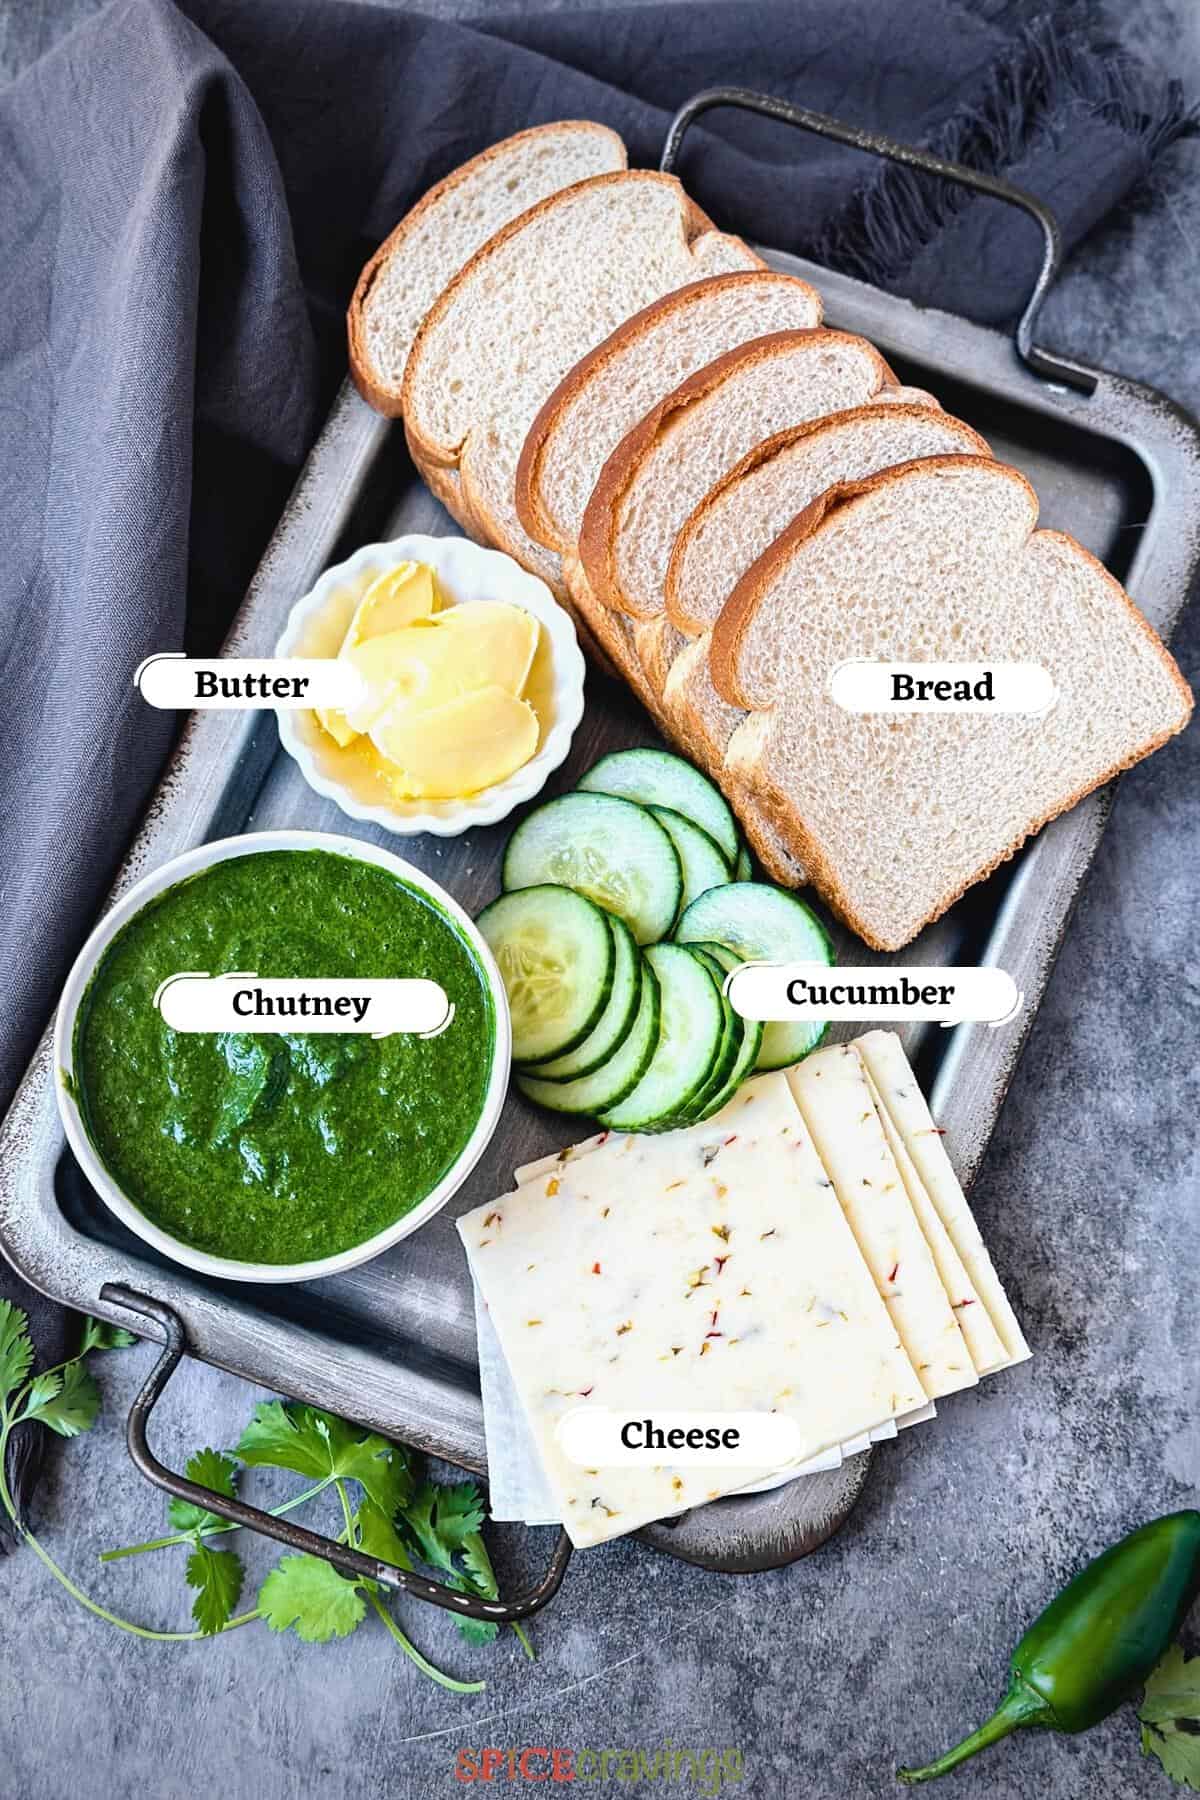 Bread, cucumber and chutney among other ingredients for chutney sandwiches on metal tray